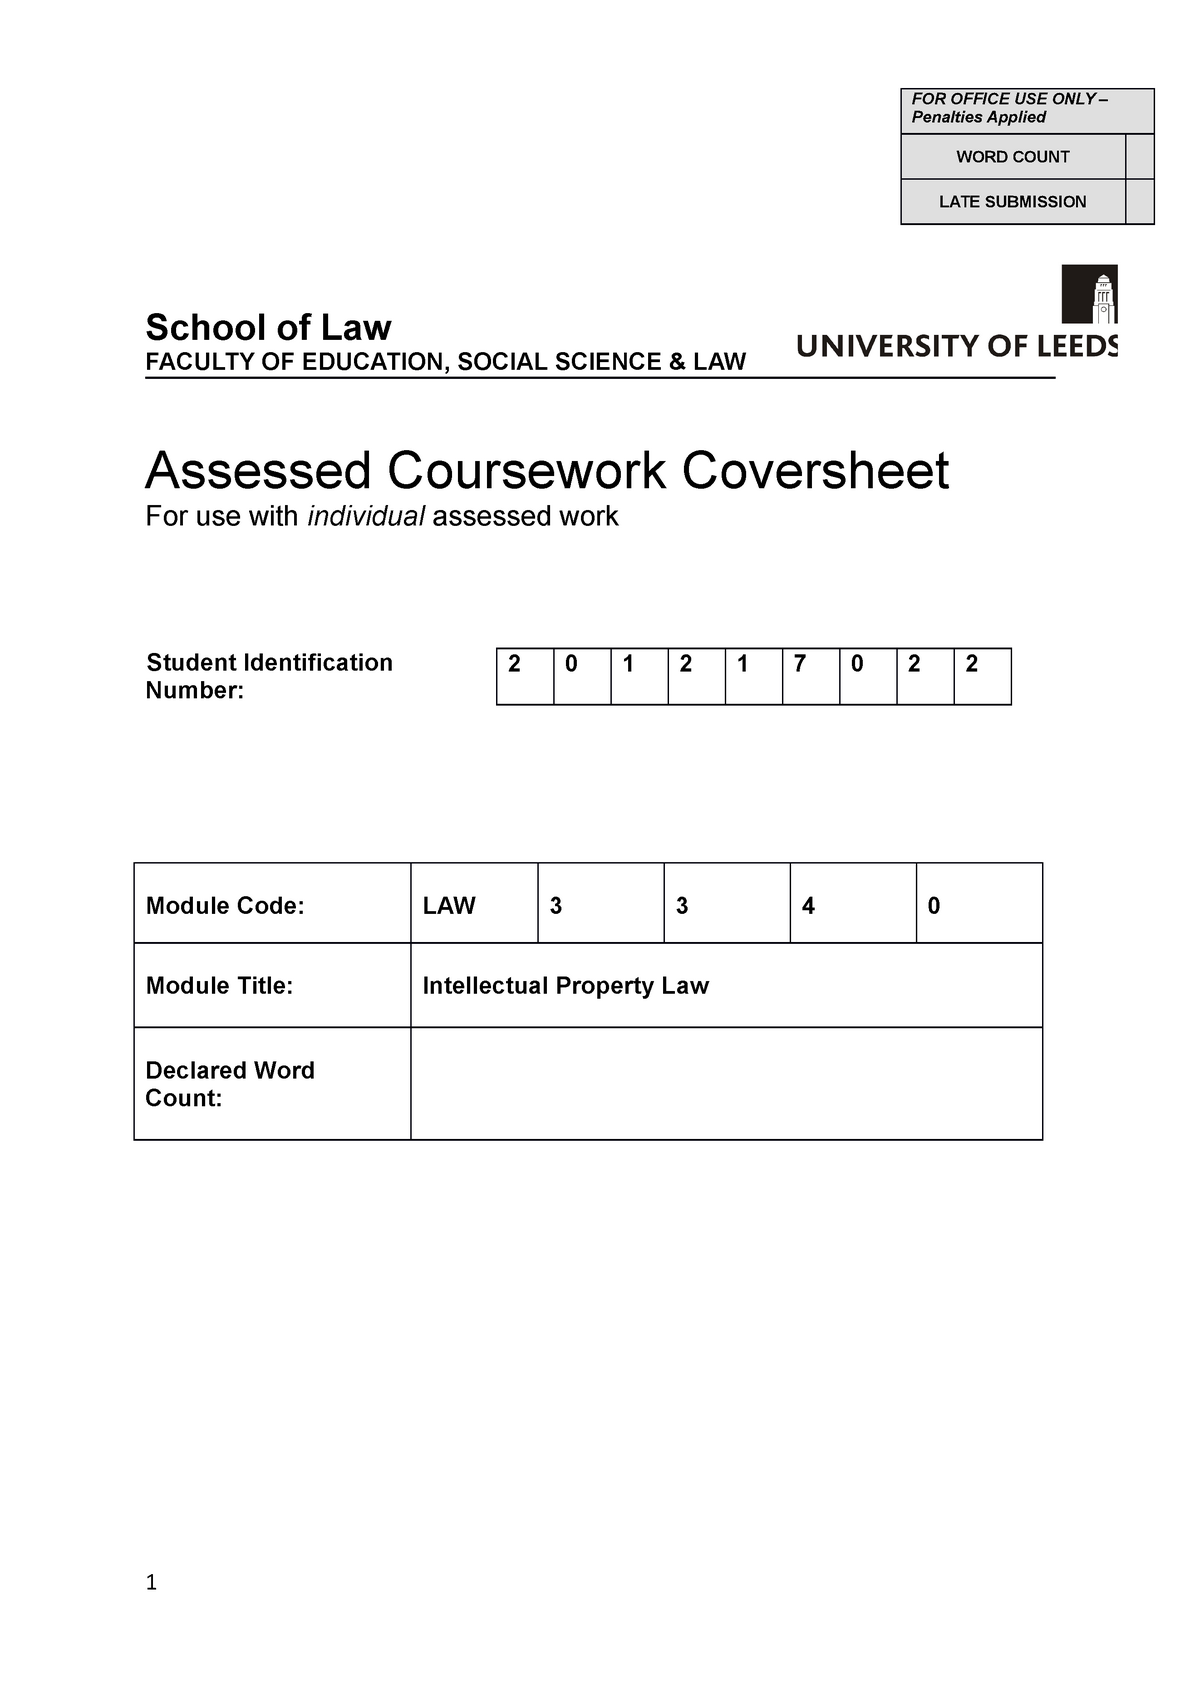 Coursework draft Grade 21 School of Law FACULTY OF EDUCATION